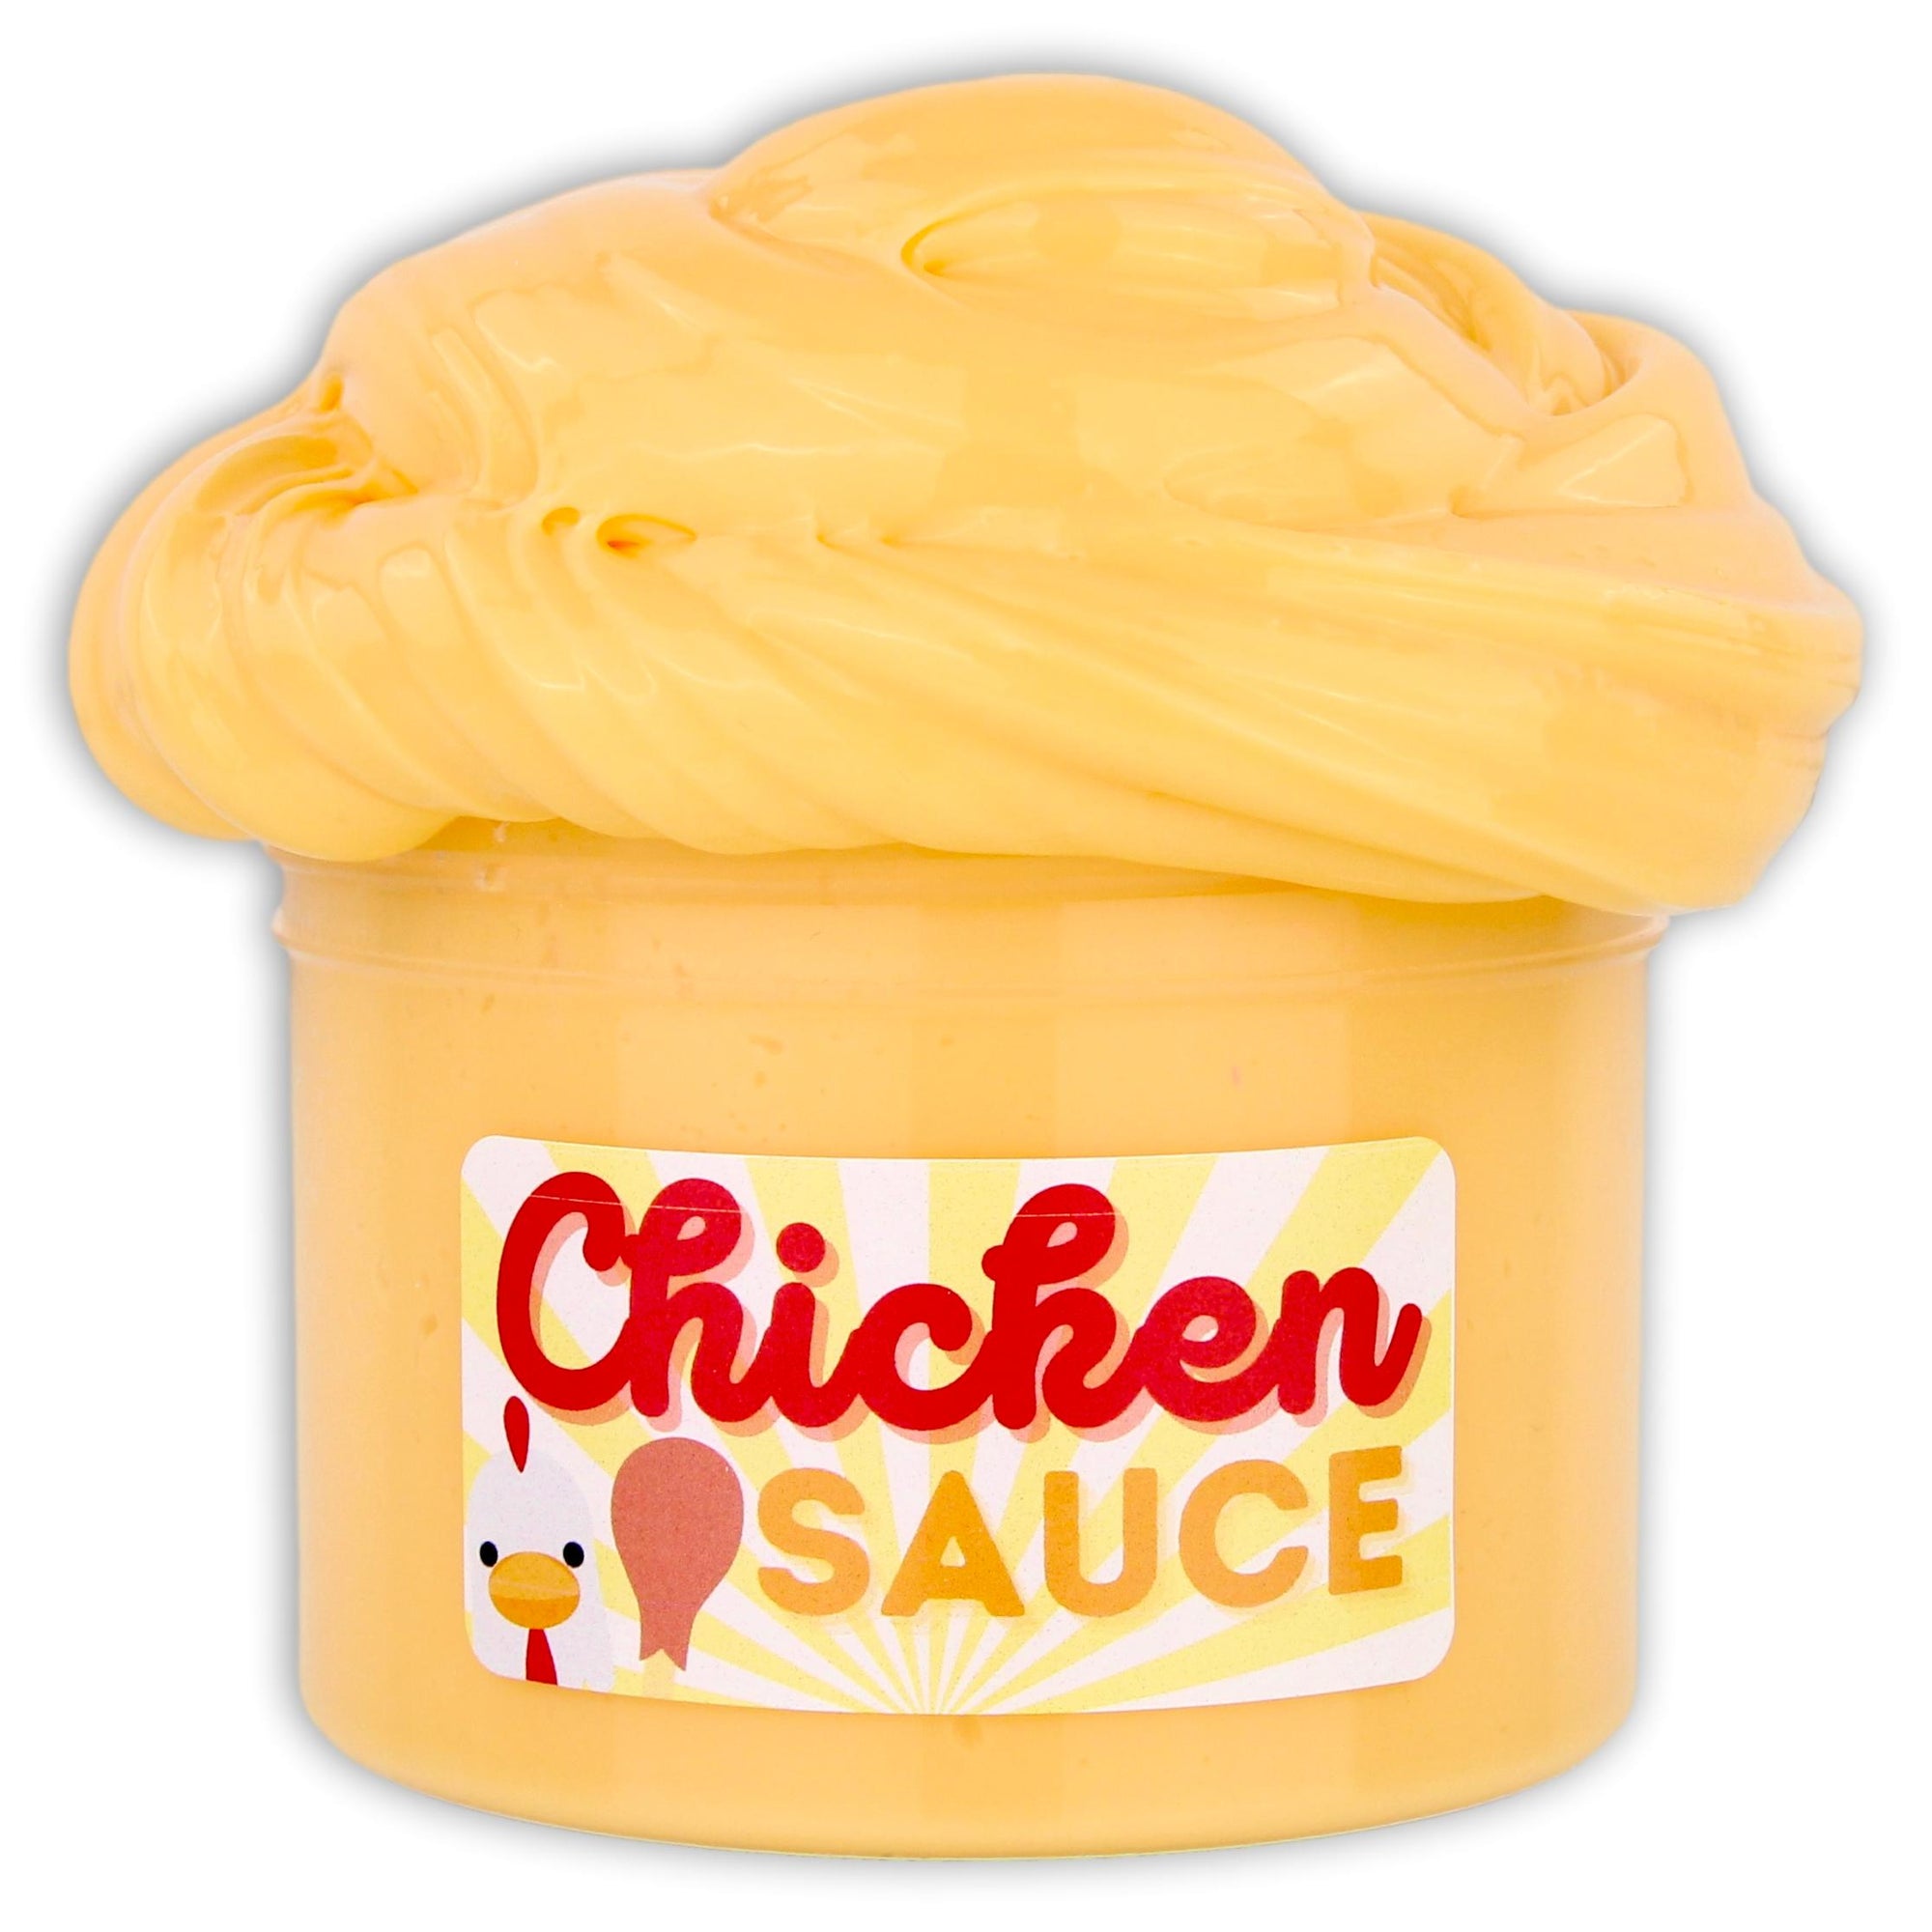 Chicken Sauce Thick & Glossy Slime - Shop Slime - Dope Slimes